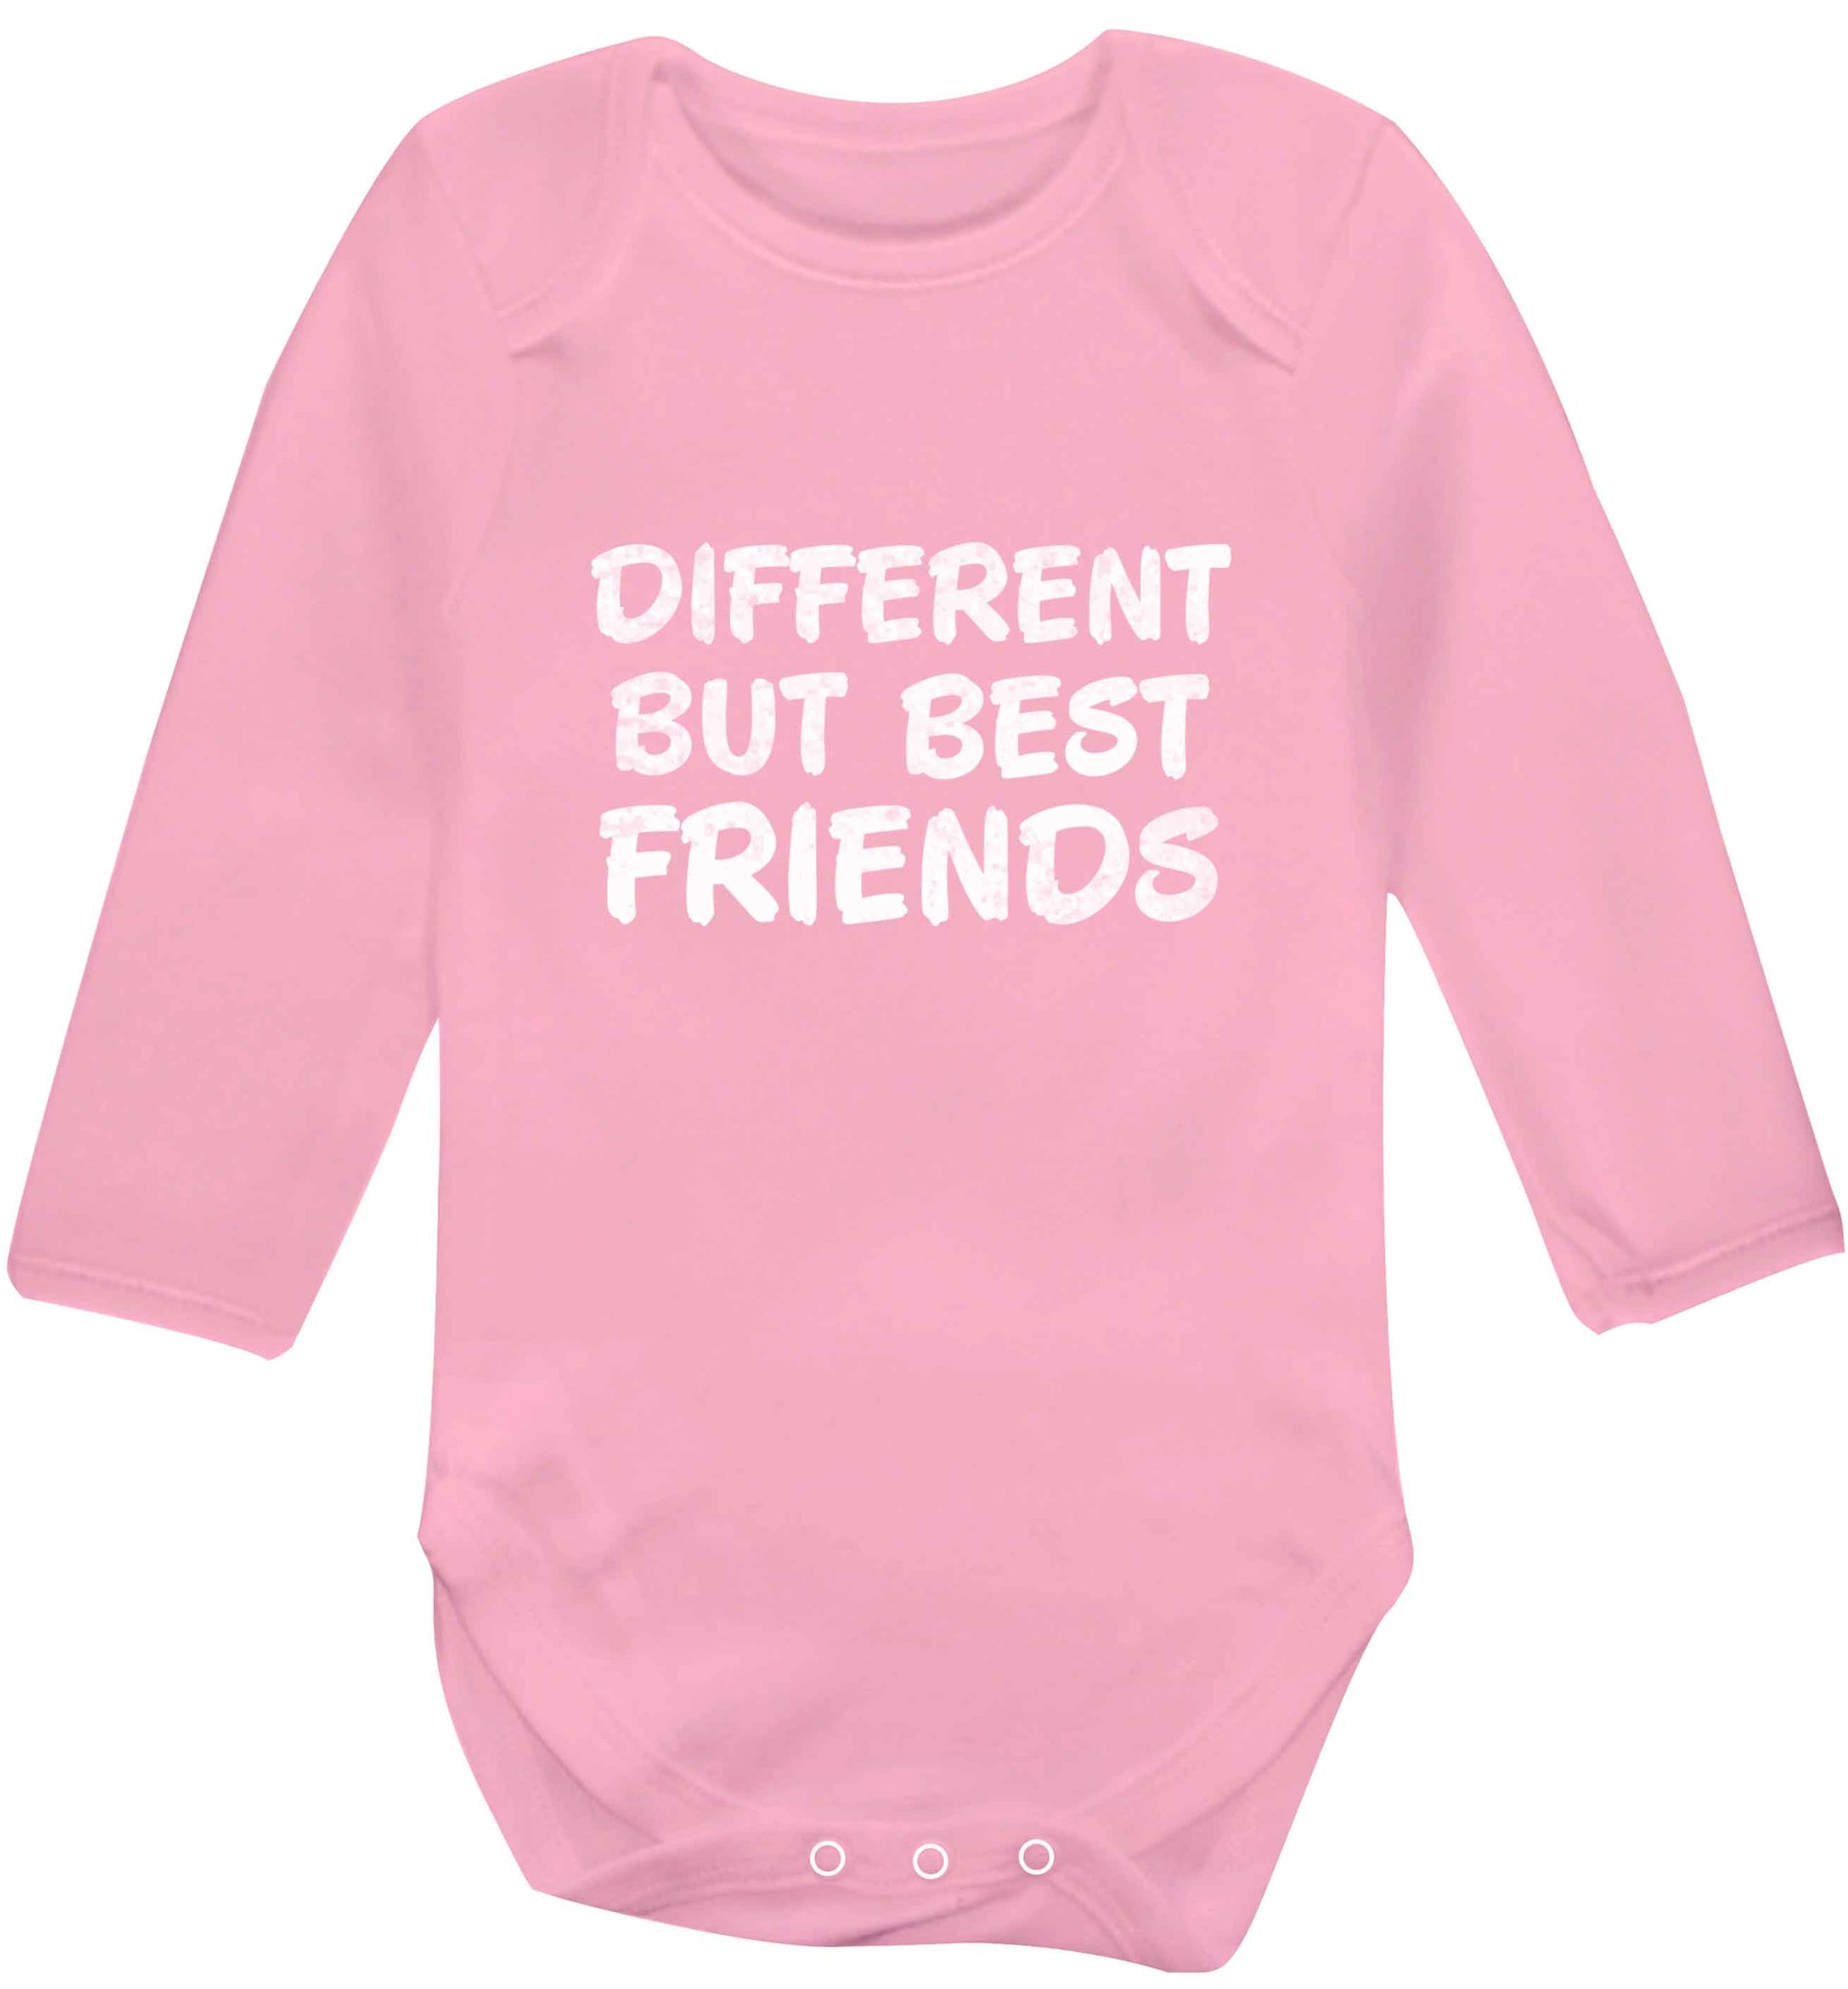 Different but best friends baby vest long sleeved pale pink 6-12 months